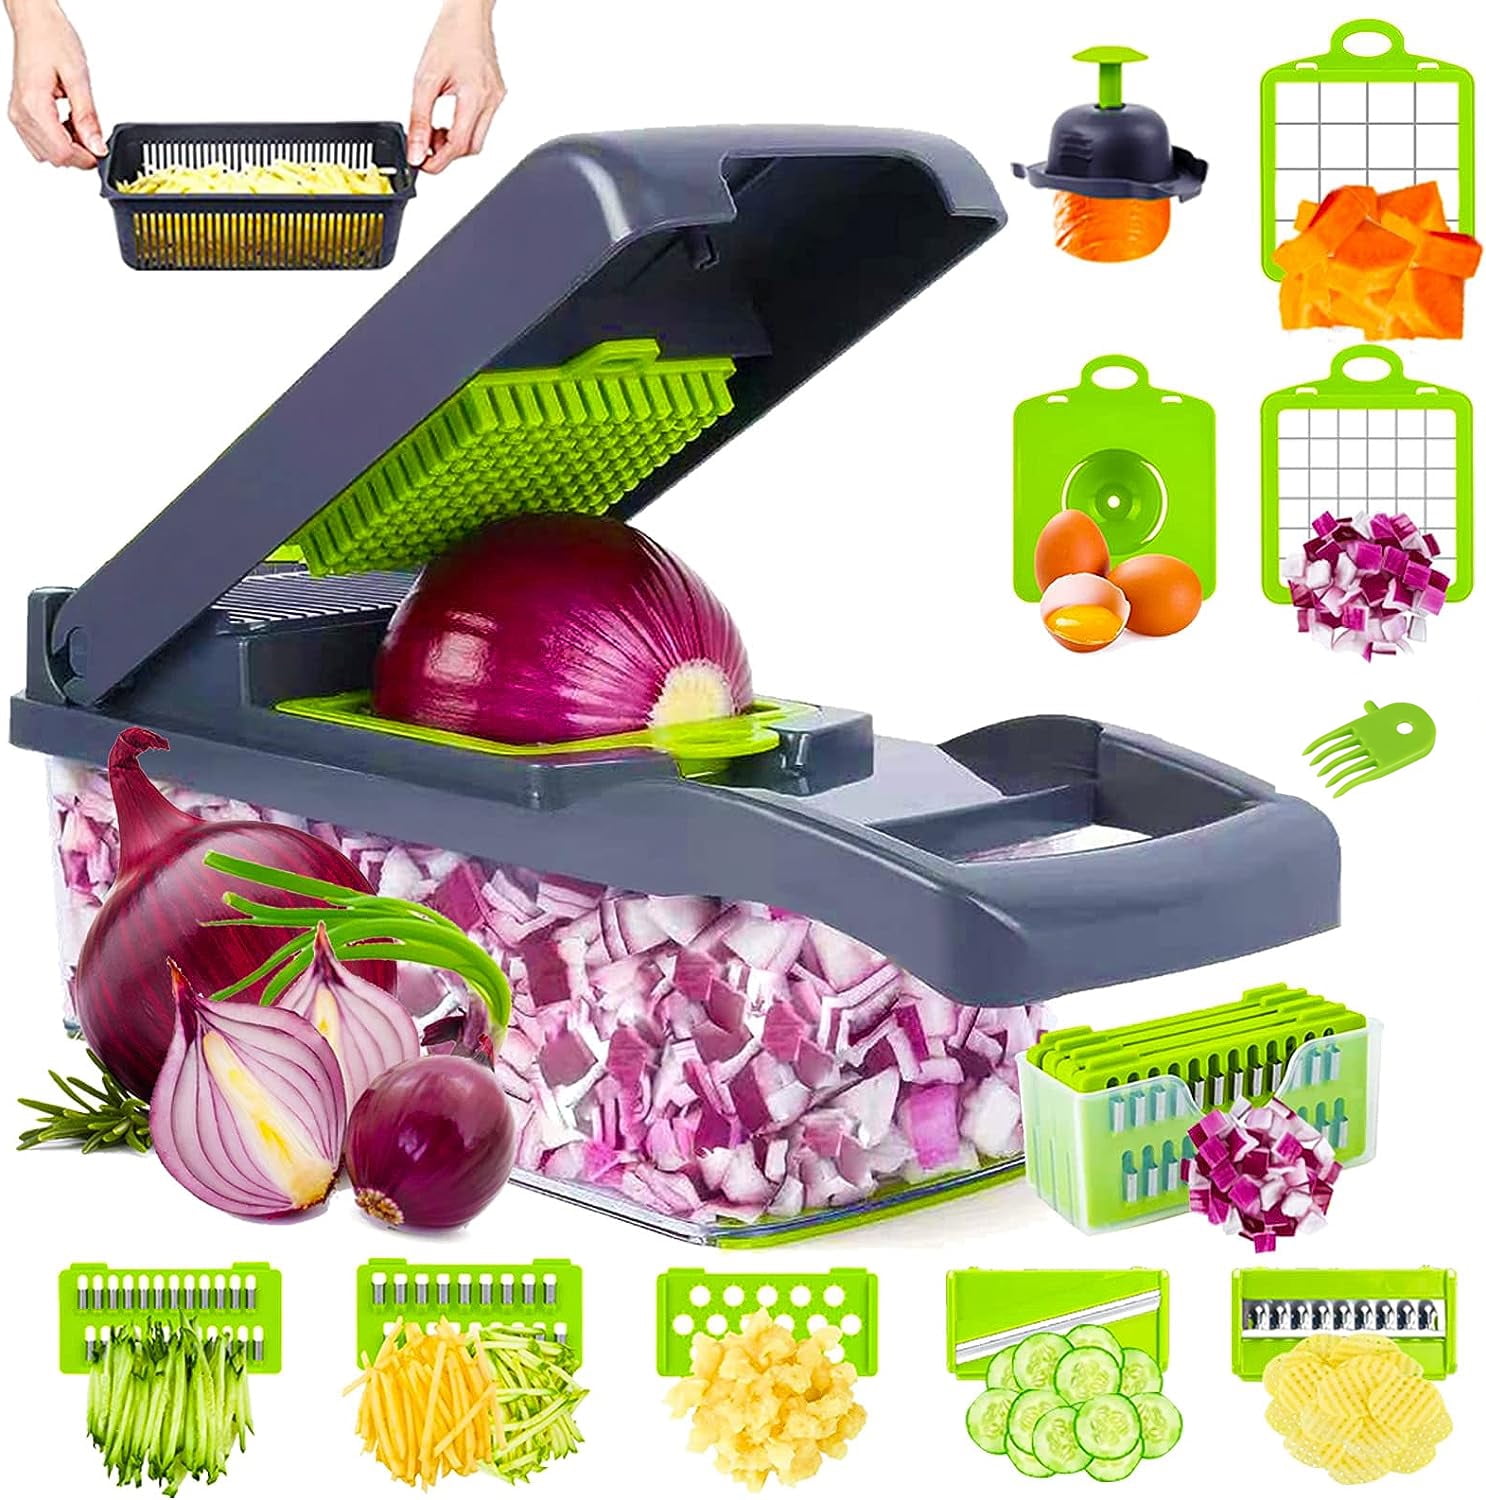 MegaChef 8-in-1 Multi-Use Slicer Dicer and Chopper with Interchangeable  Blades, Vegetable and Fruit Peeler and Soft Slicer